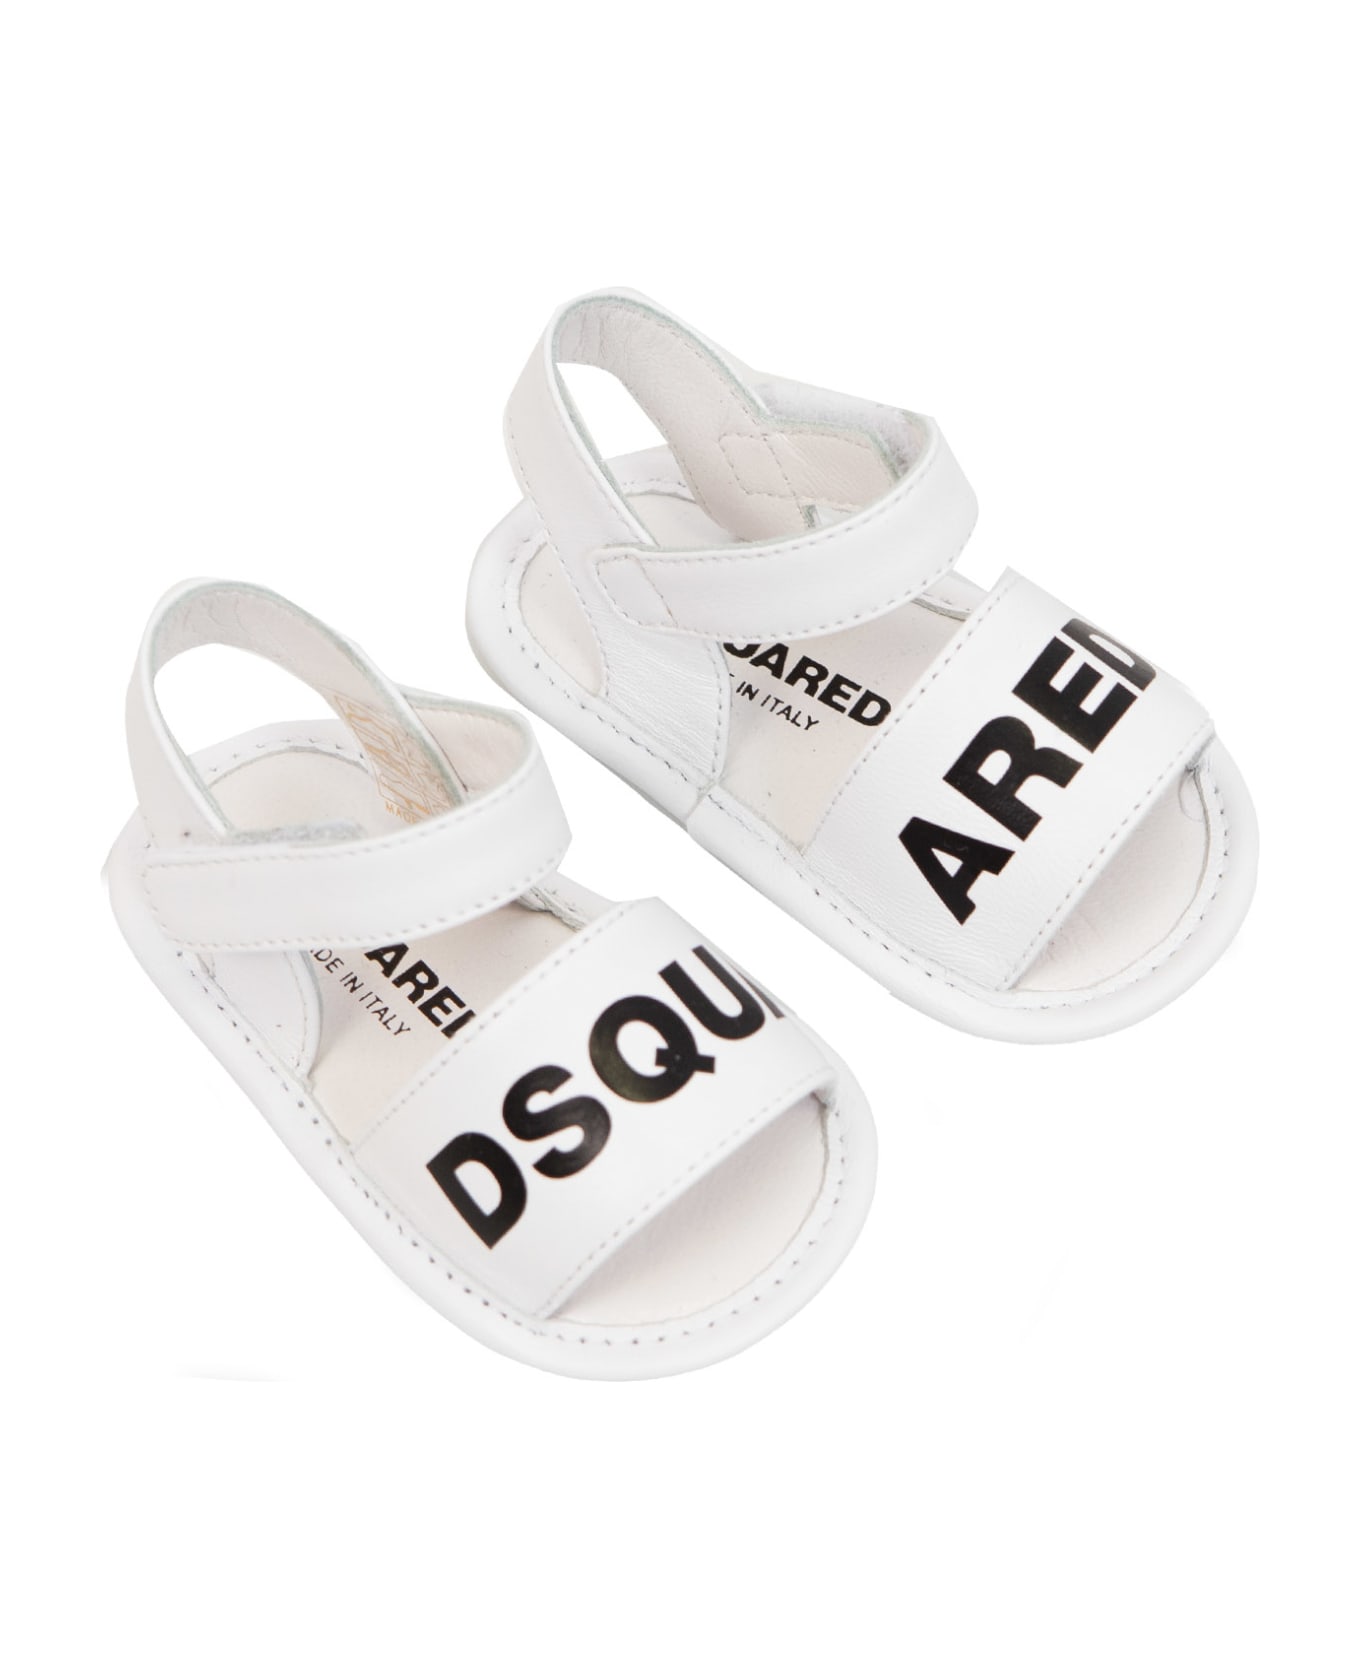 Dsquared2 Leather Sandals - White シューズ